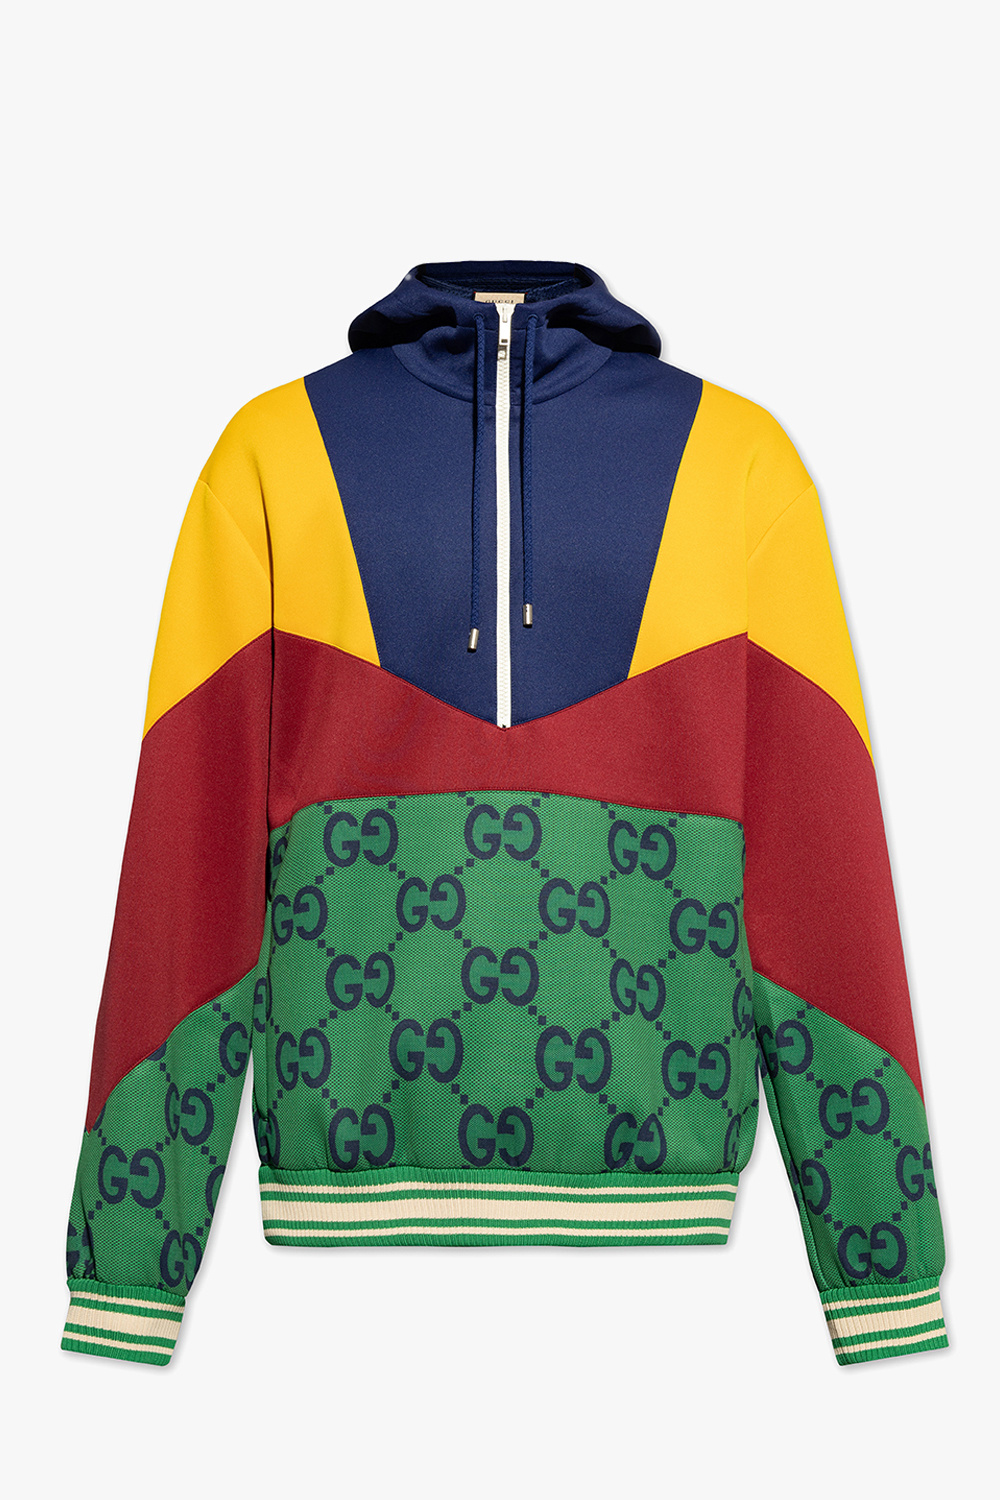 Find Outfit Gucci Donald Duck X Supreme Lv Sweatshirt T-Shirt for Today 